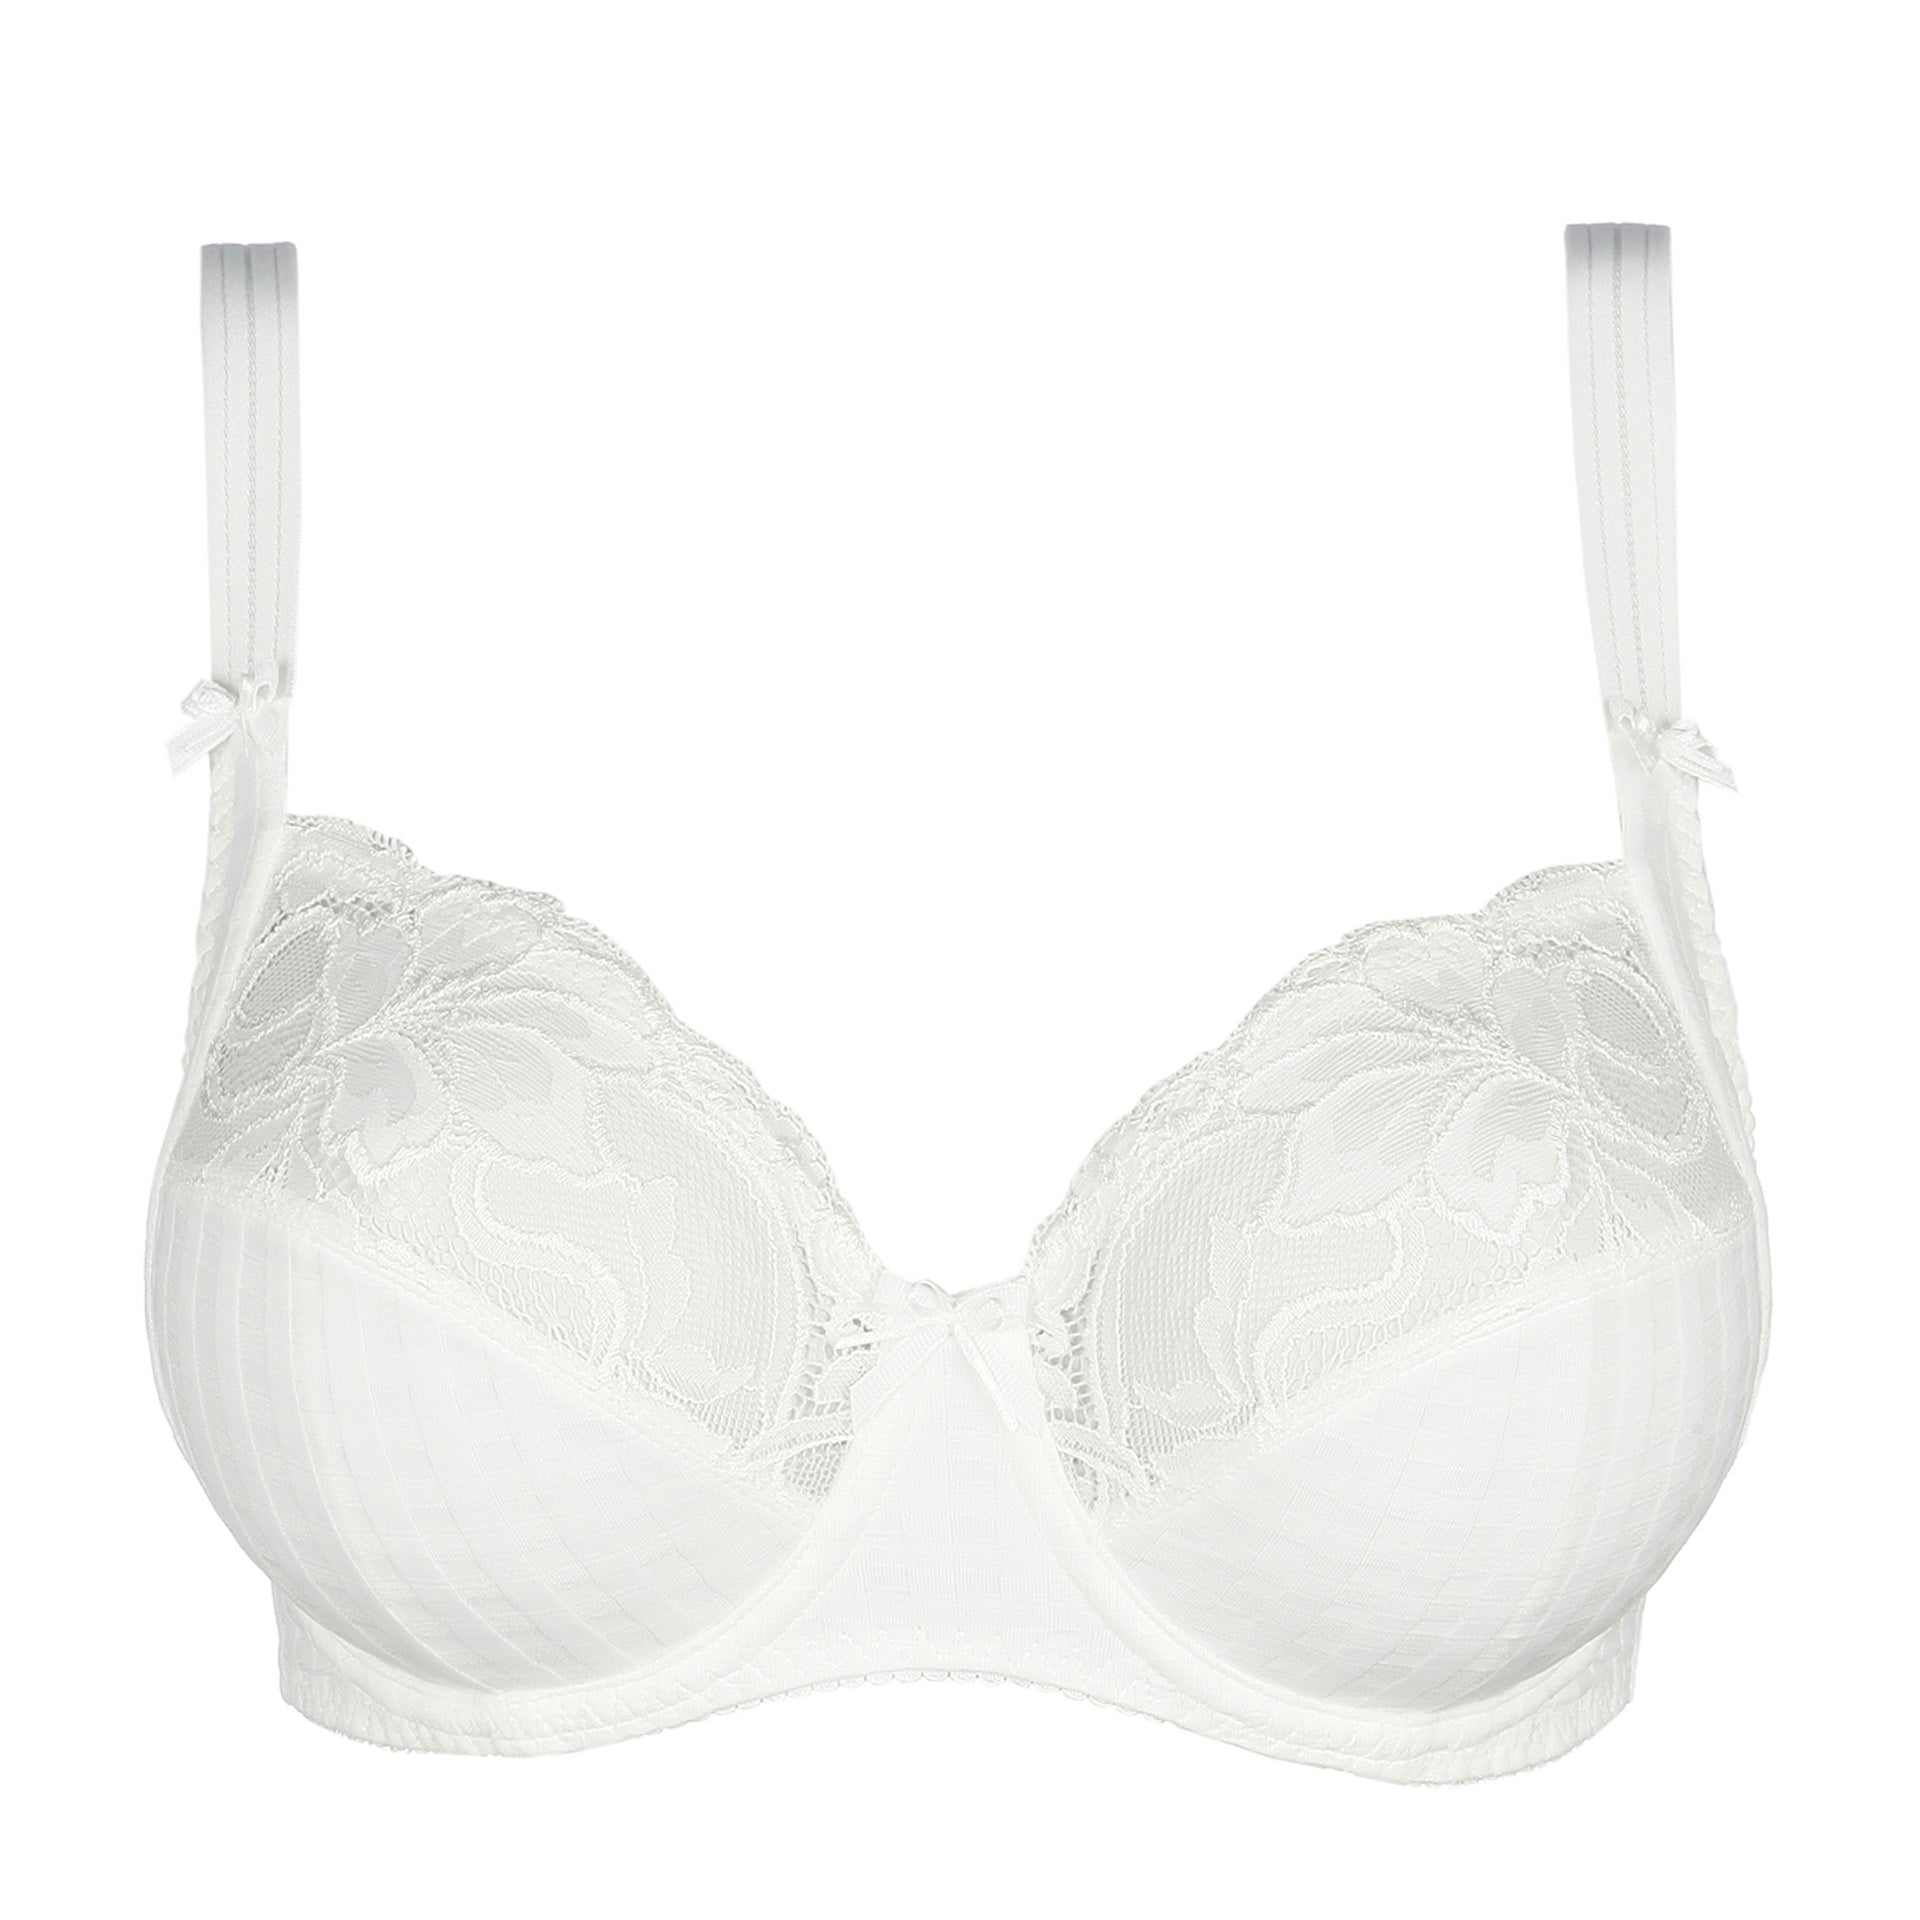 Madison full cup bra in Natural by PrimaDonna.